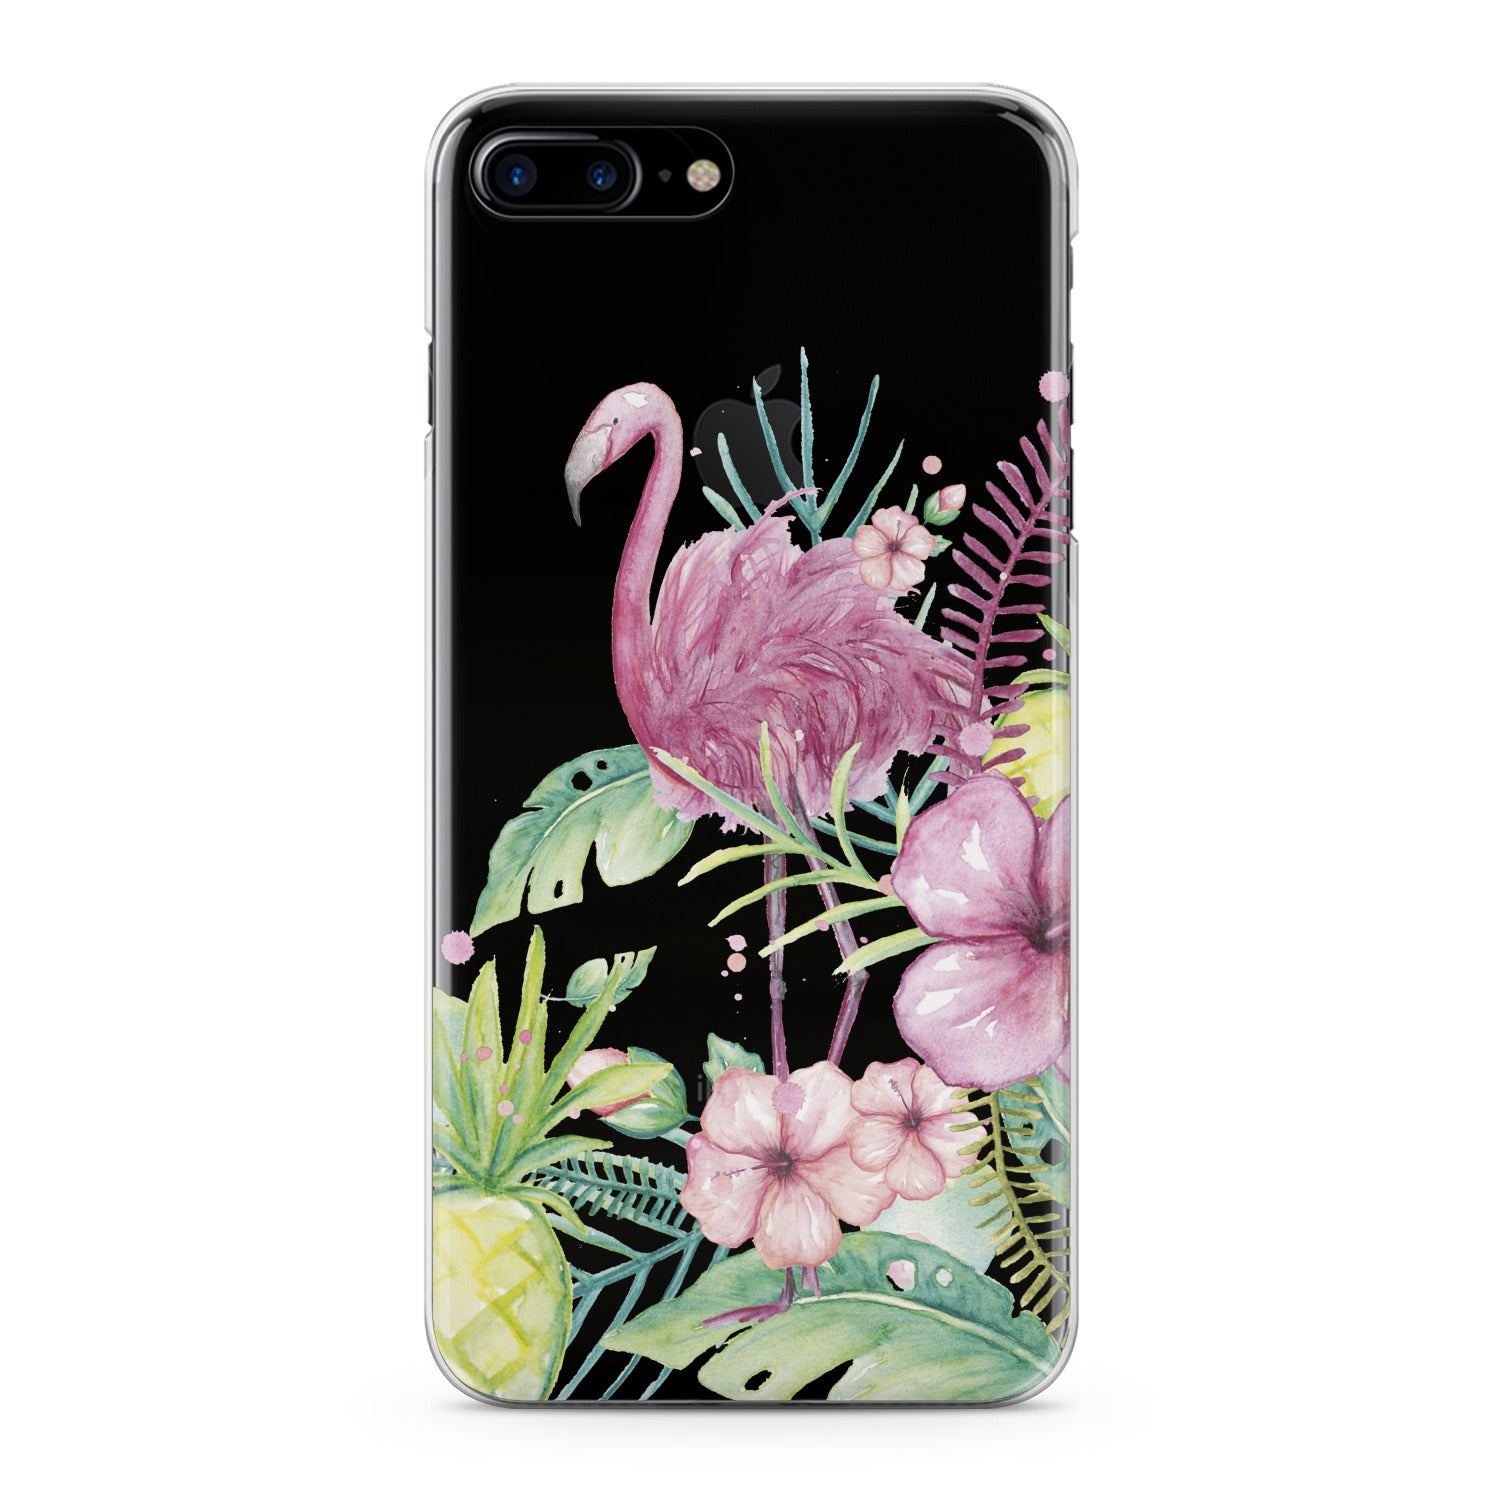 Lex Altern Flamingo Tropical Phone Case for your iPhone & Android phone.